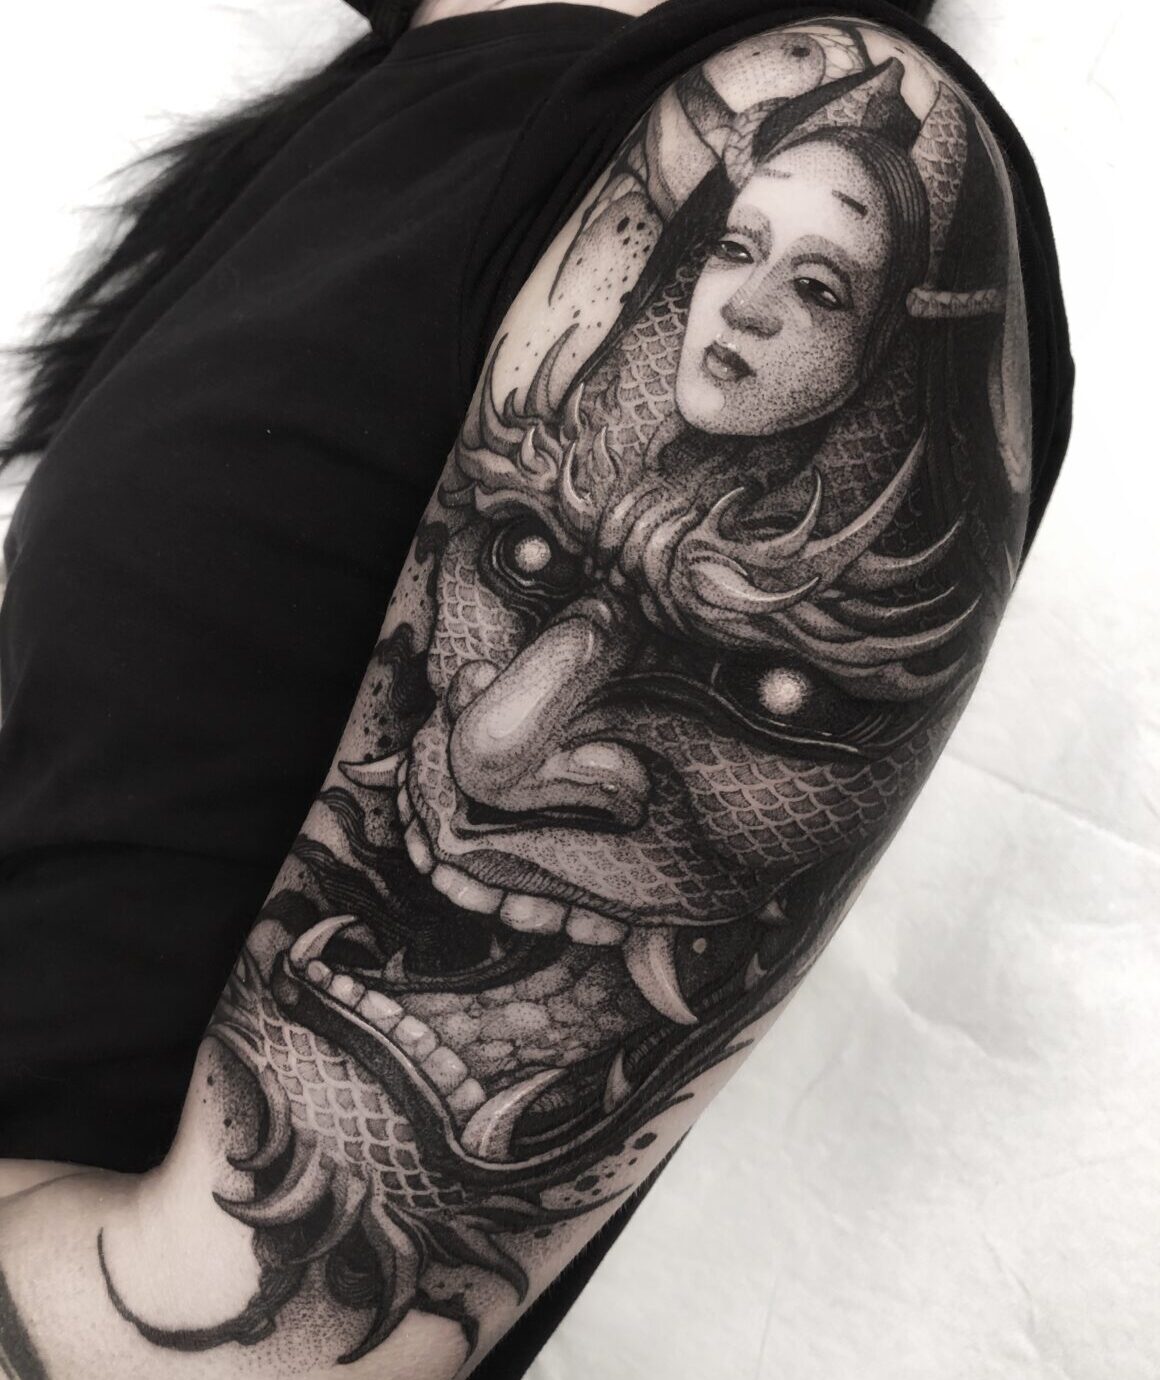 Black and Grey Japanese Sleeve In Progress by George Bardadim tattoo  artist based in NYC Resident artist at Tattoo Culture Brooklyn Tattoo  Shop